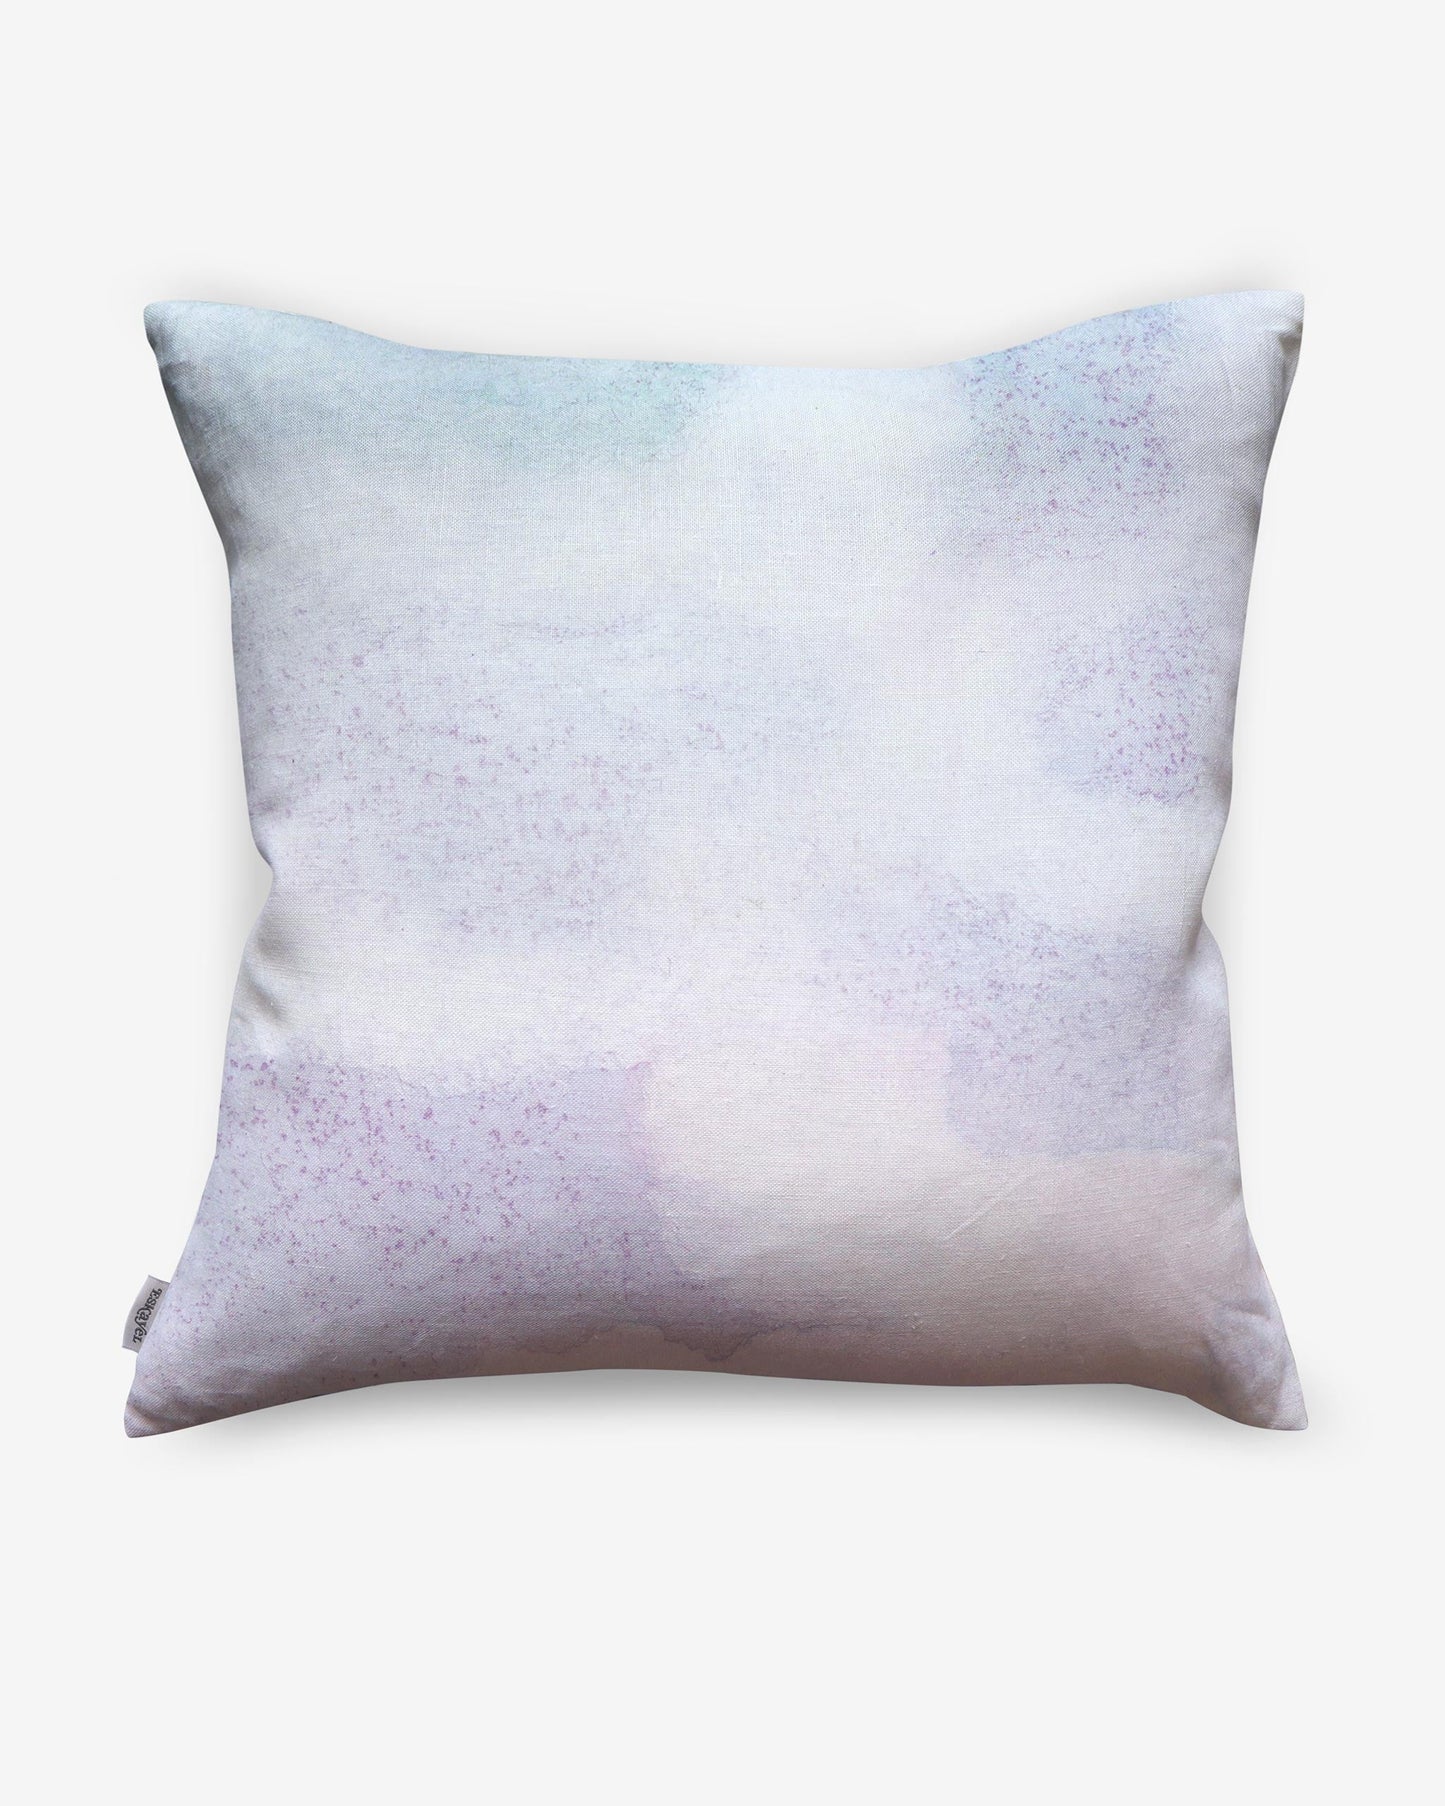 A Portico pillow with a watercolor painting by Eskayel studio